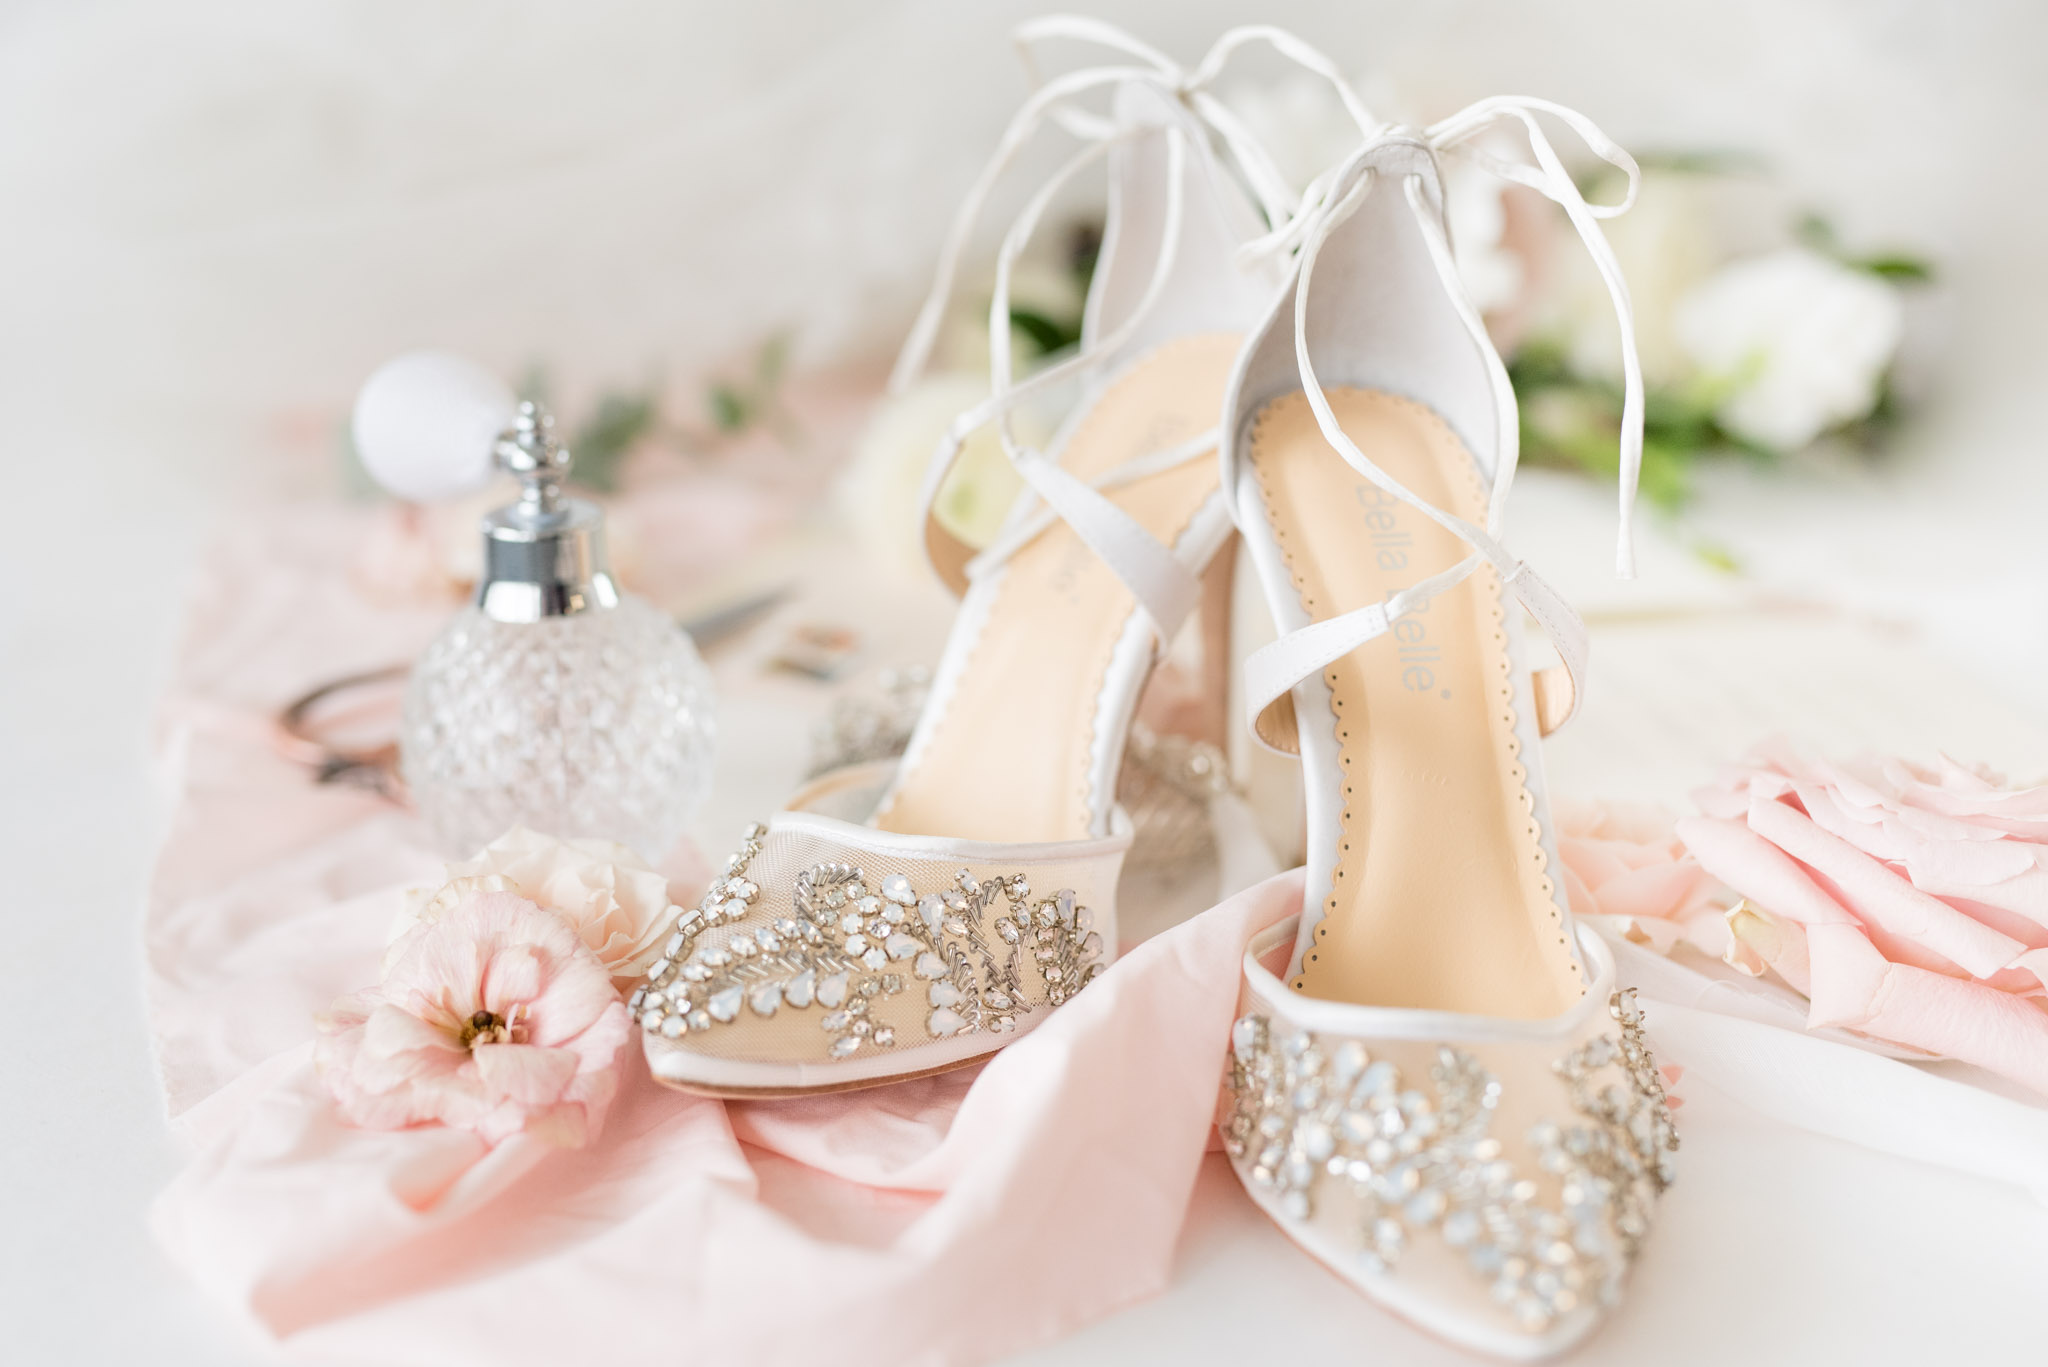 Wedding shoes sit with perfume bottle and flowers.